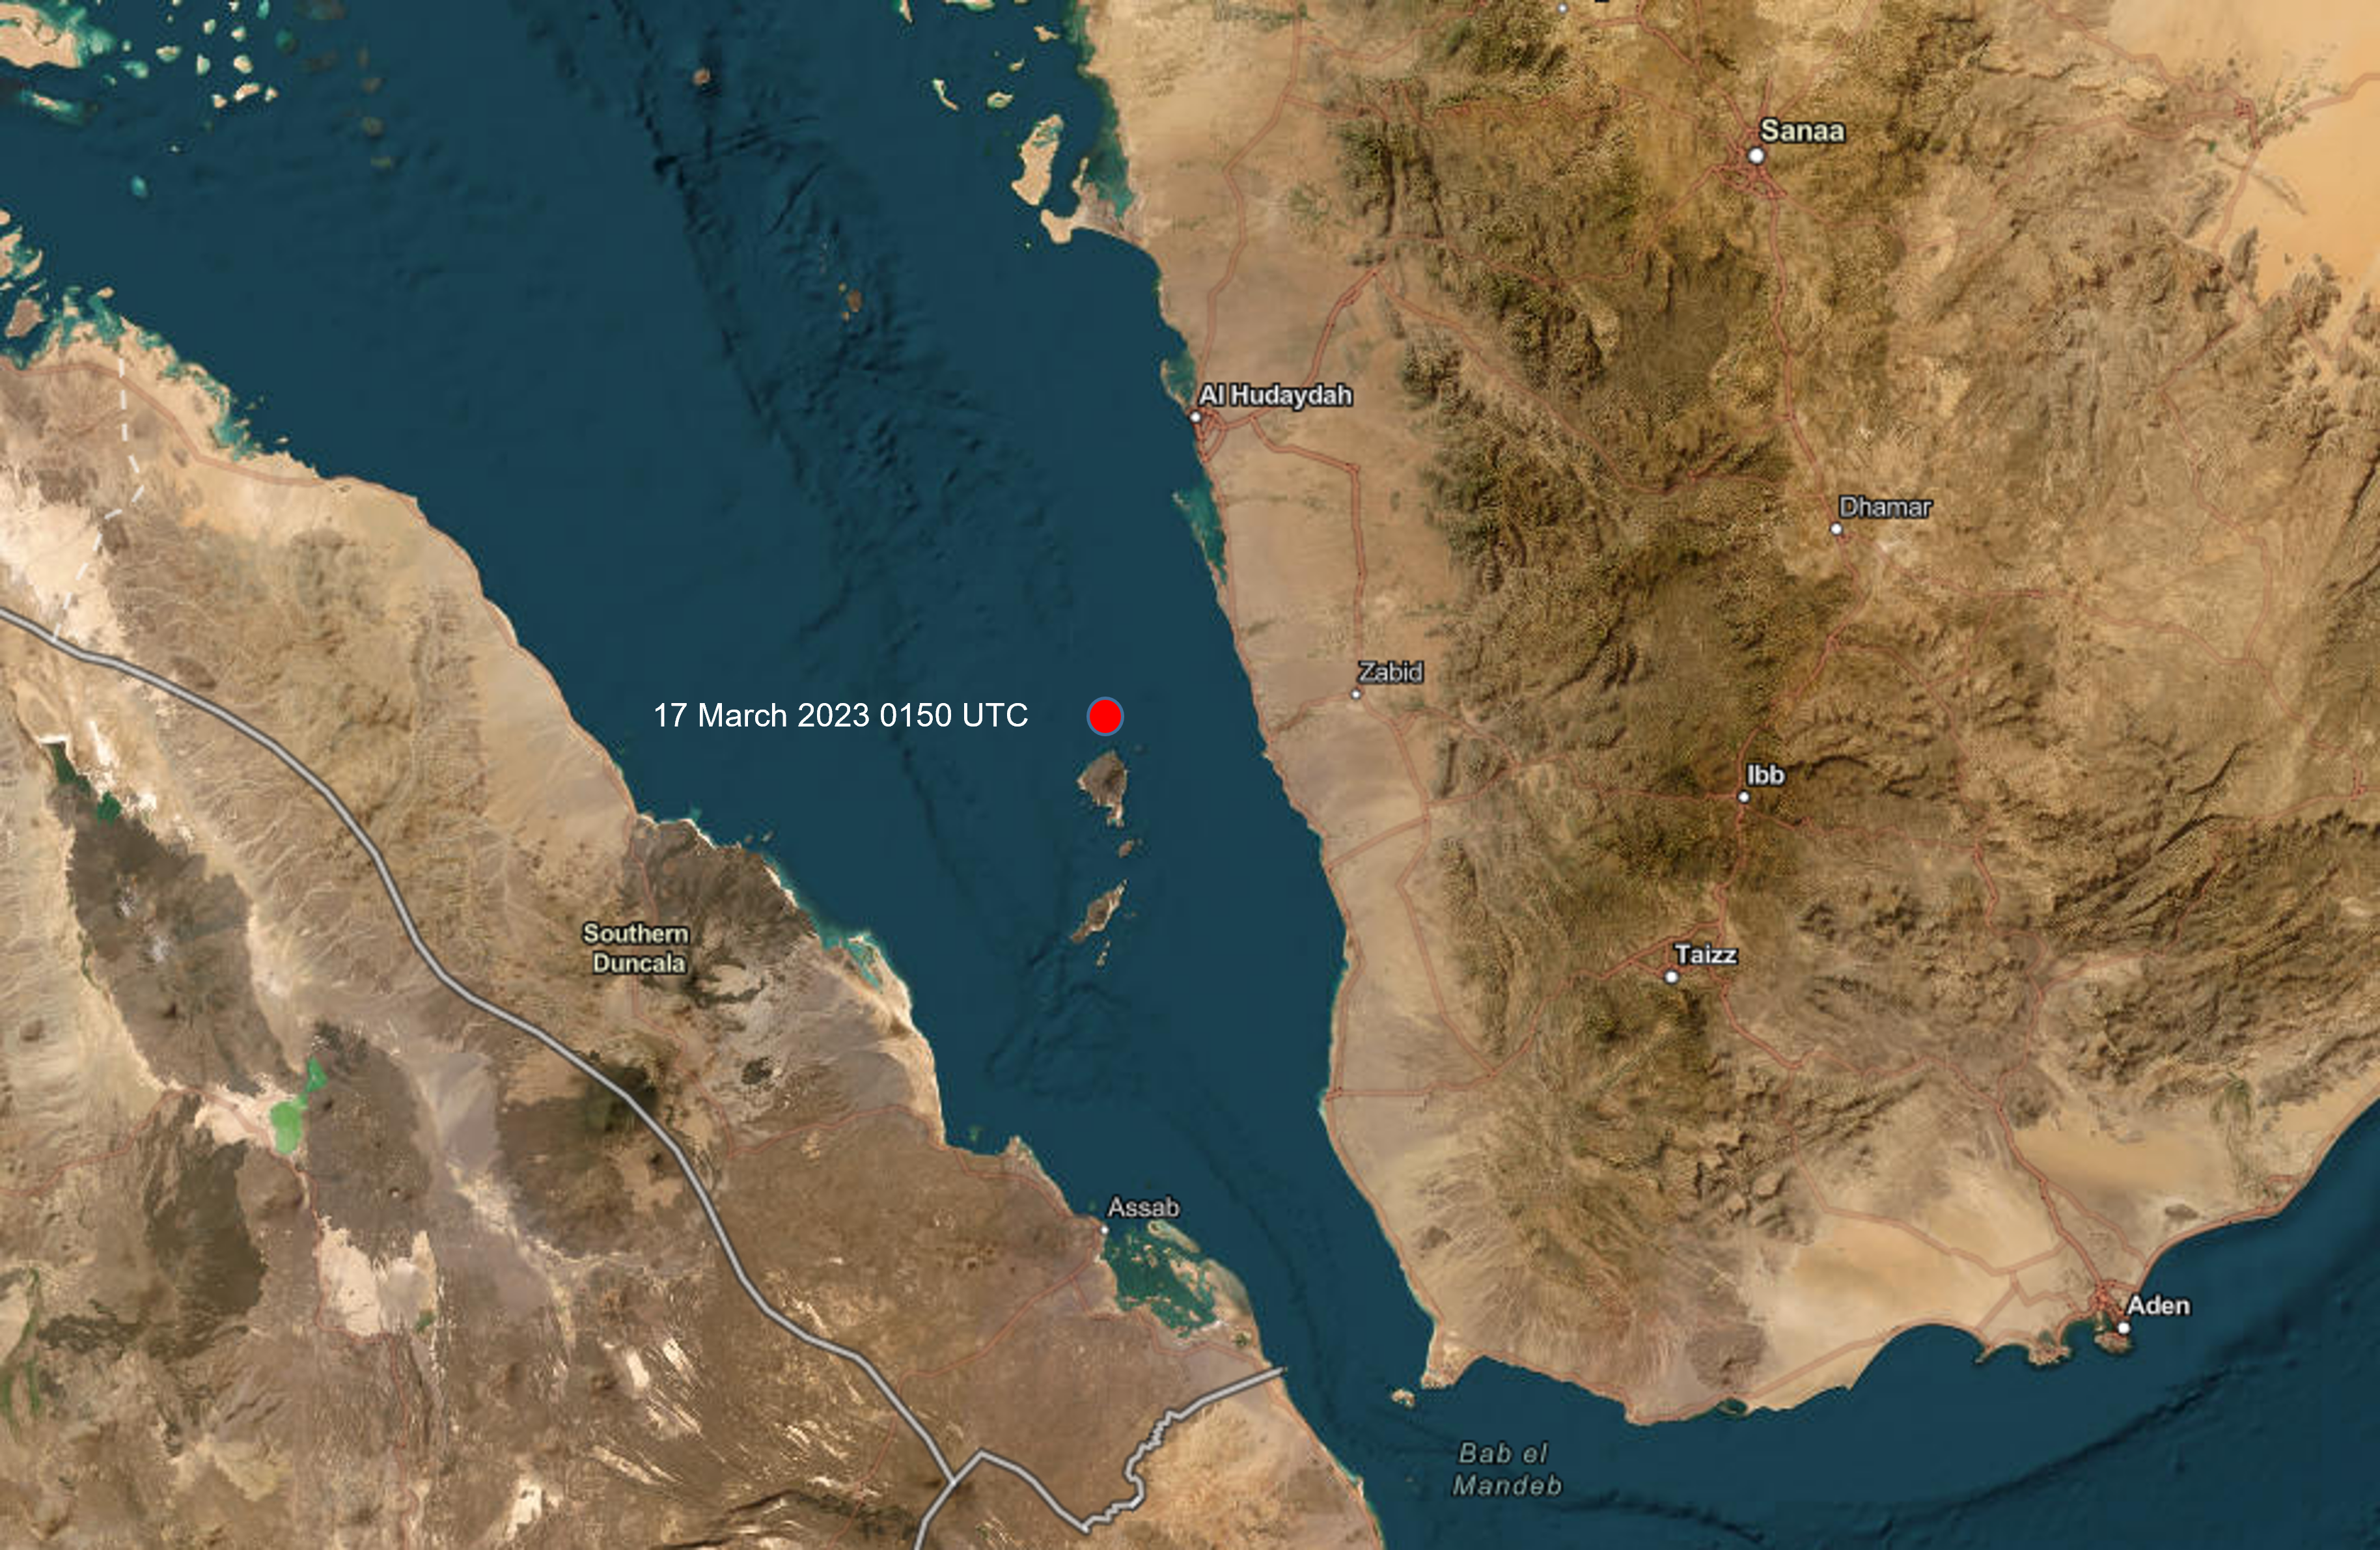 Neptune P2P Group - Incident Alert - Vessel Fired on in the Southern Red Sea - 17 March 2023